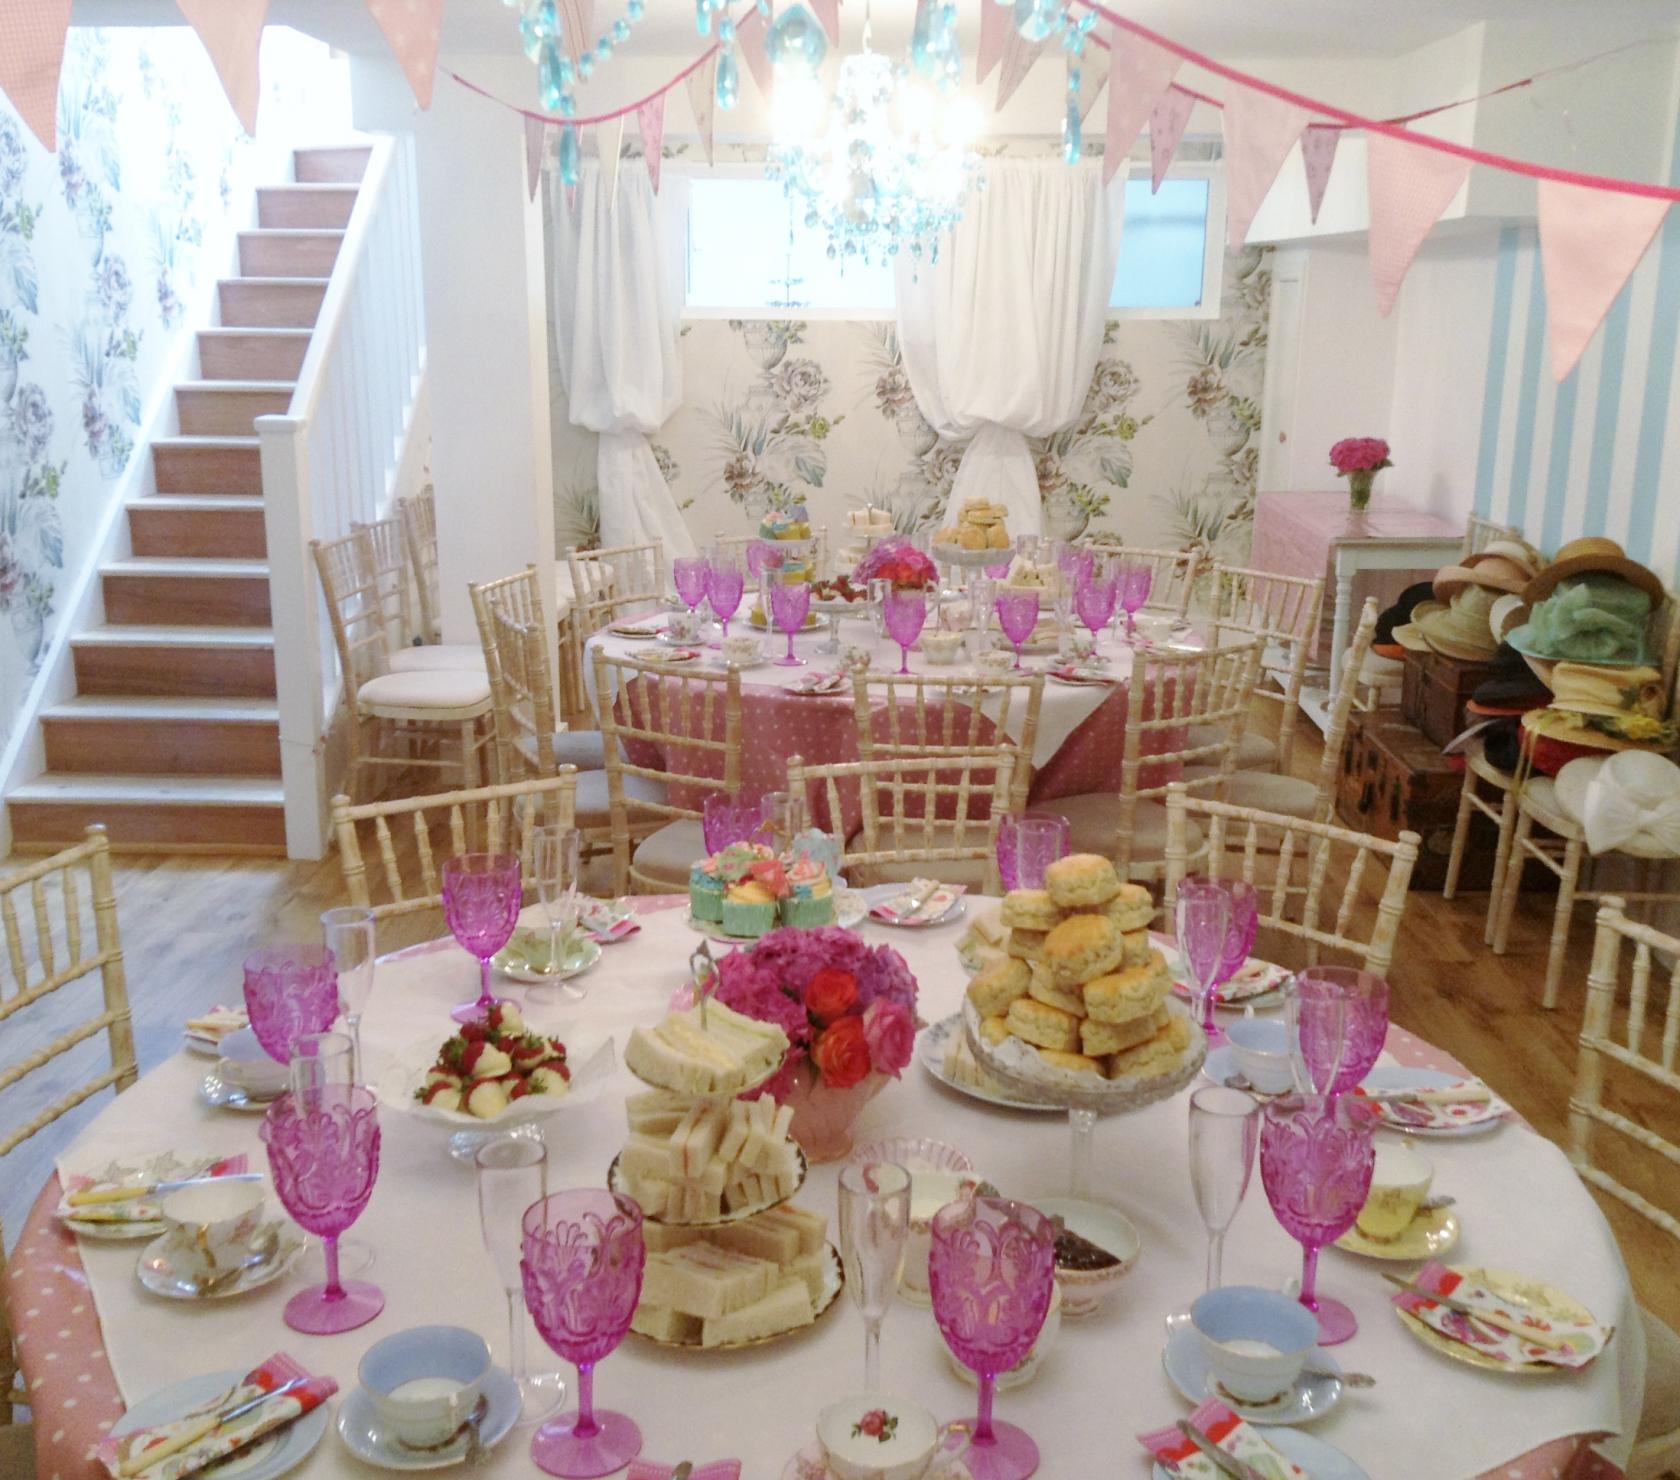 hire-tea-party-whole-venue-from-28-enquire-in-seconds